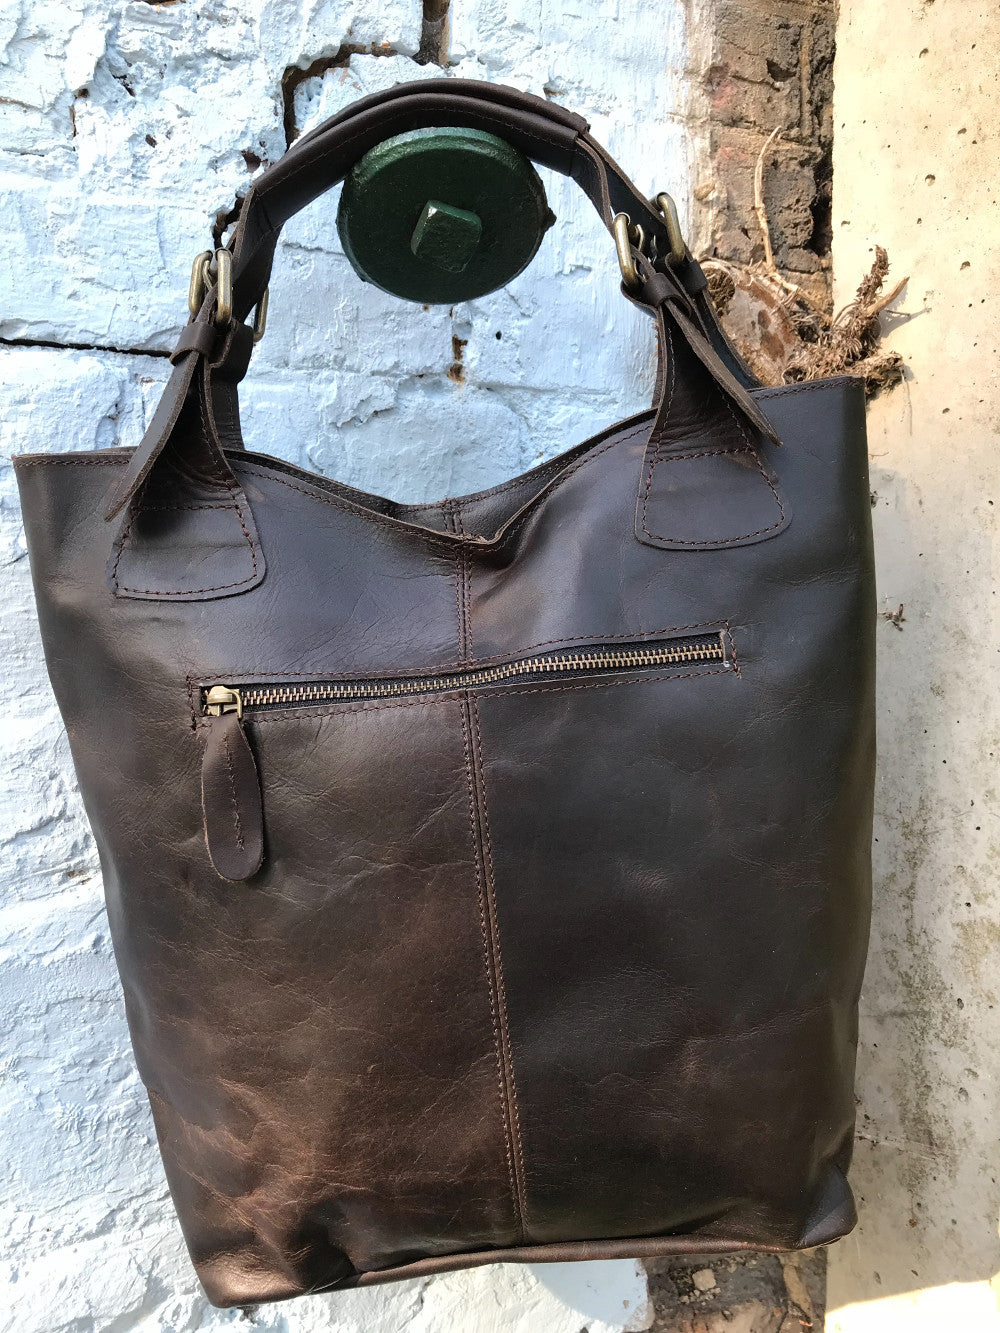 The Gretton. A handmade vintage leather tote by Burghley Bags